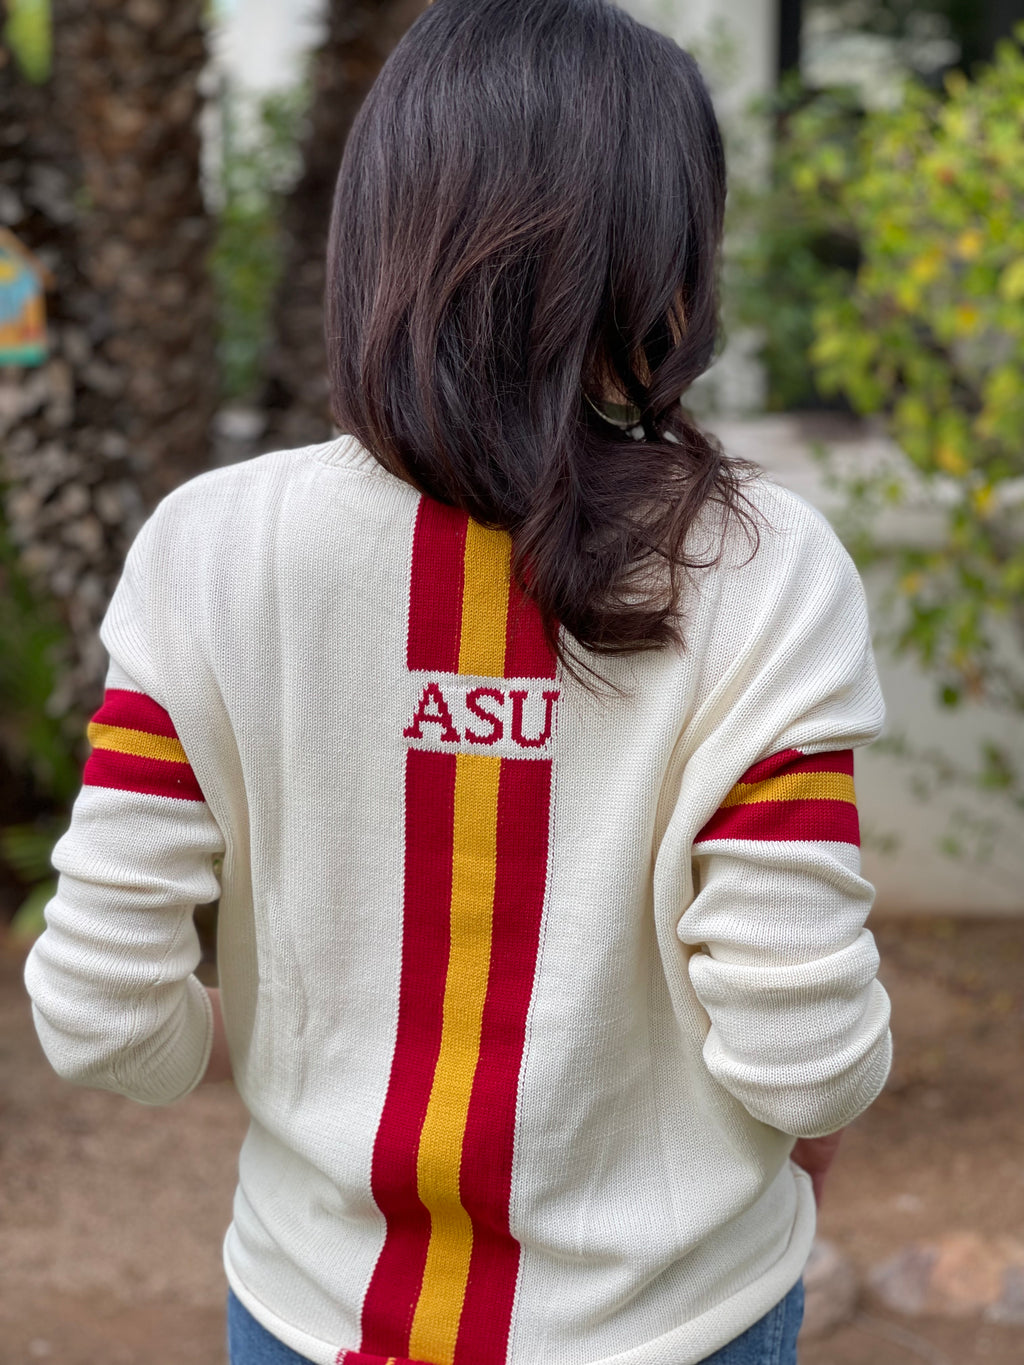 The ASU Rugby Stripe Cotton Sweater